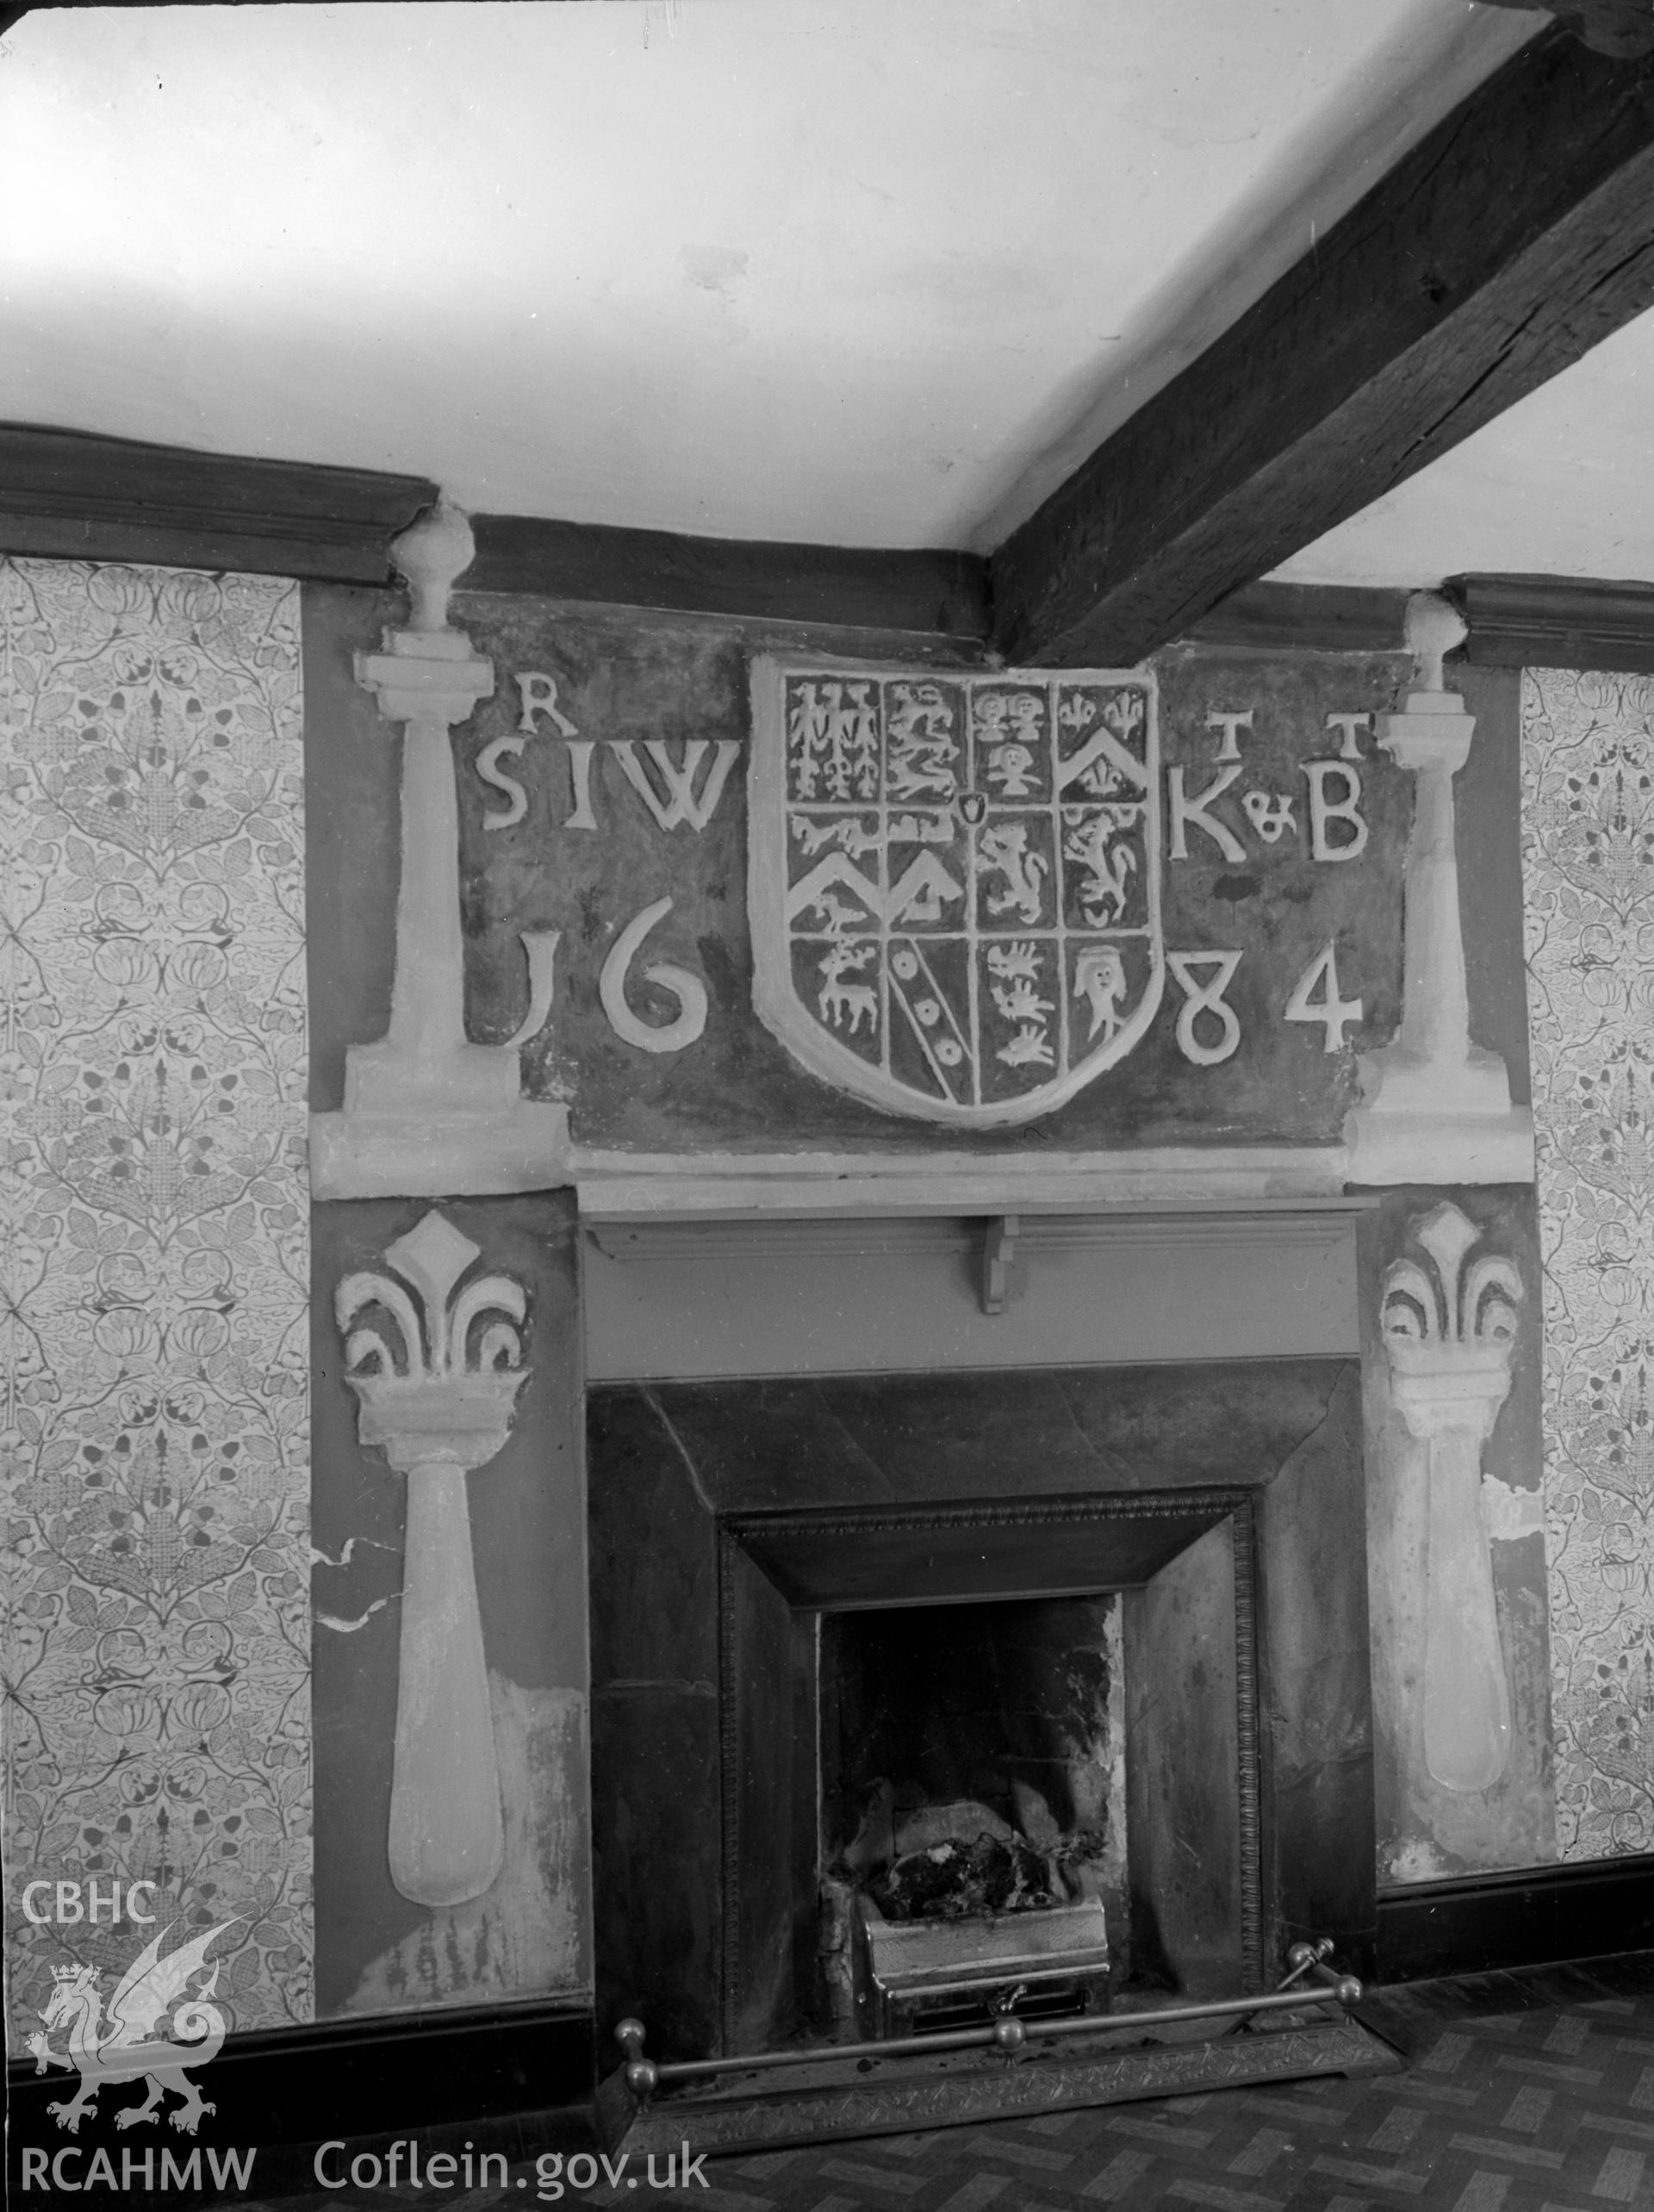 Fireplace with the date 1684 and a coat of arms situated above the mantle.